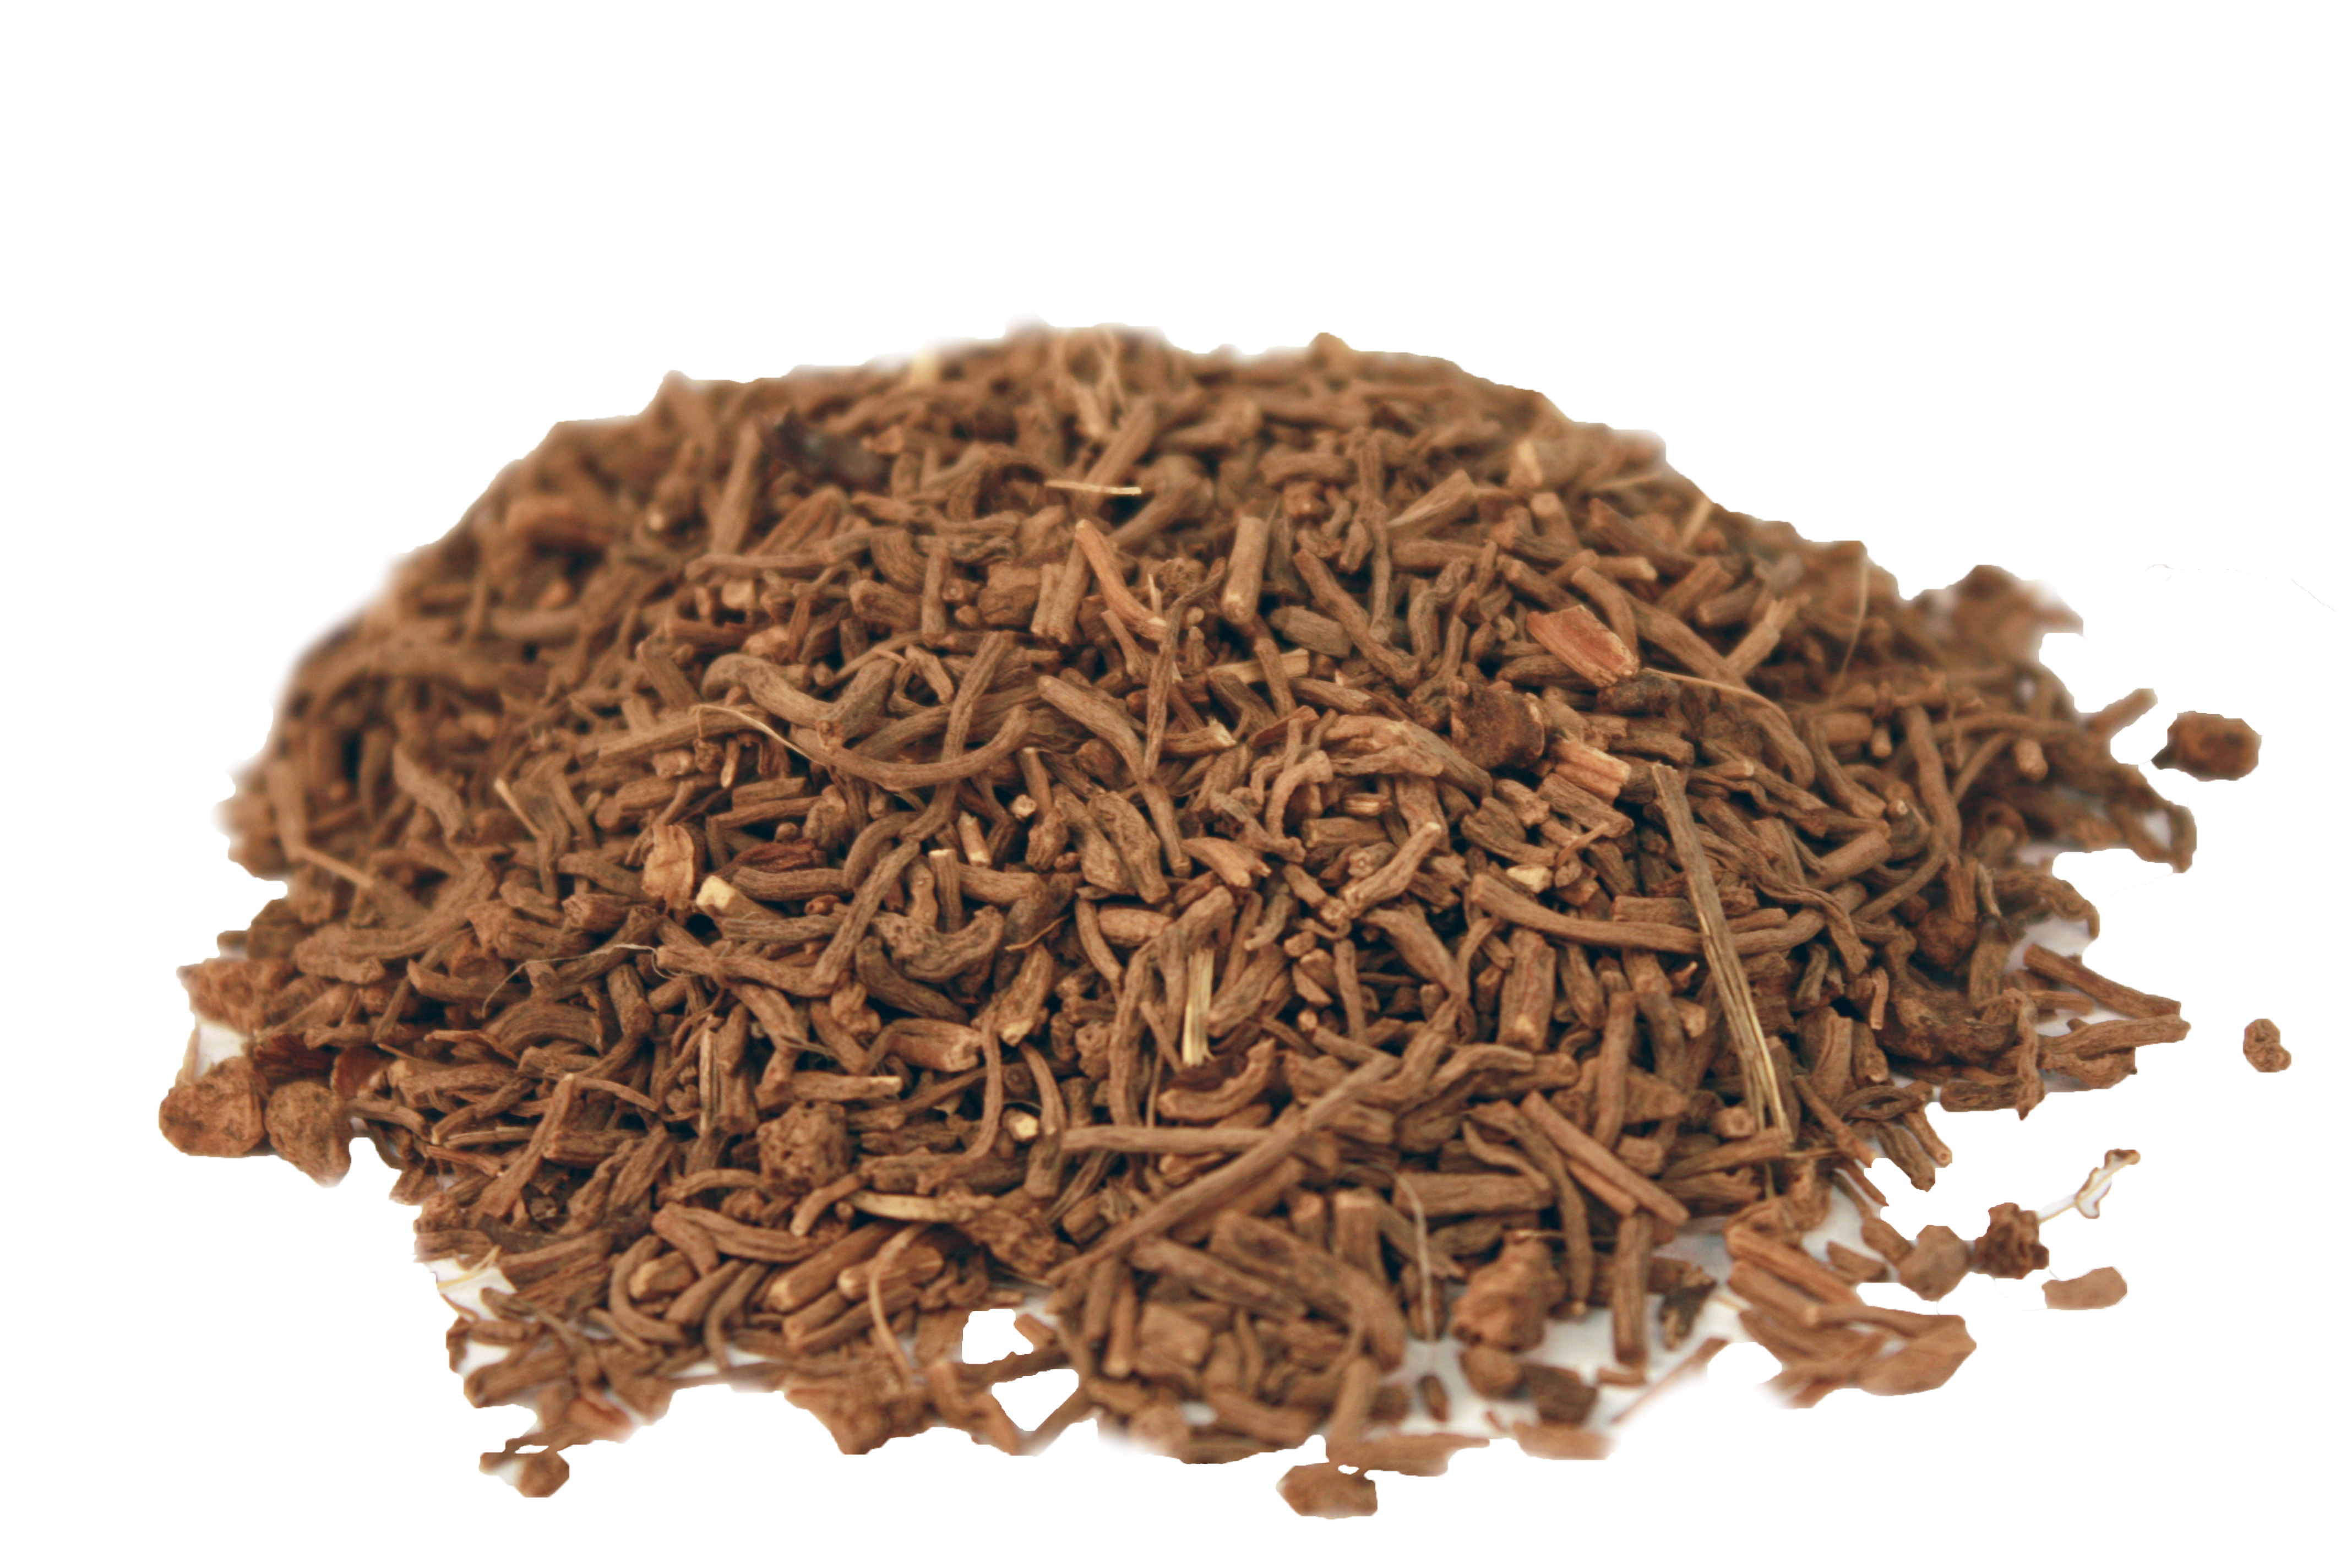 Valerian - a l’il brown sugar for those l’il buddies who can’t handle the weed.